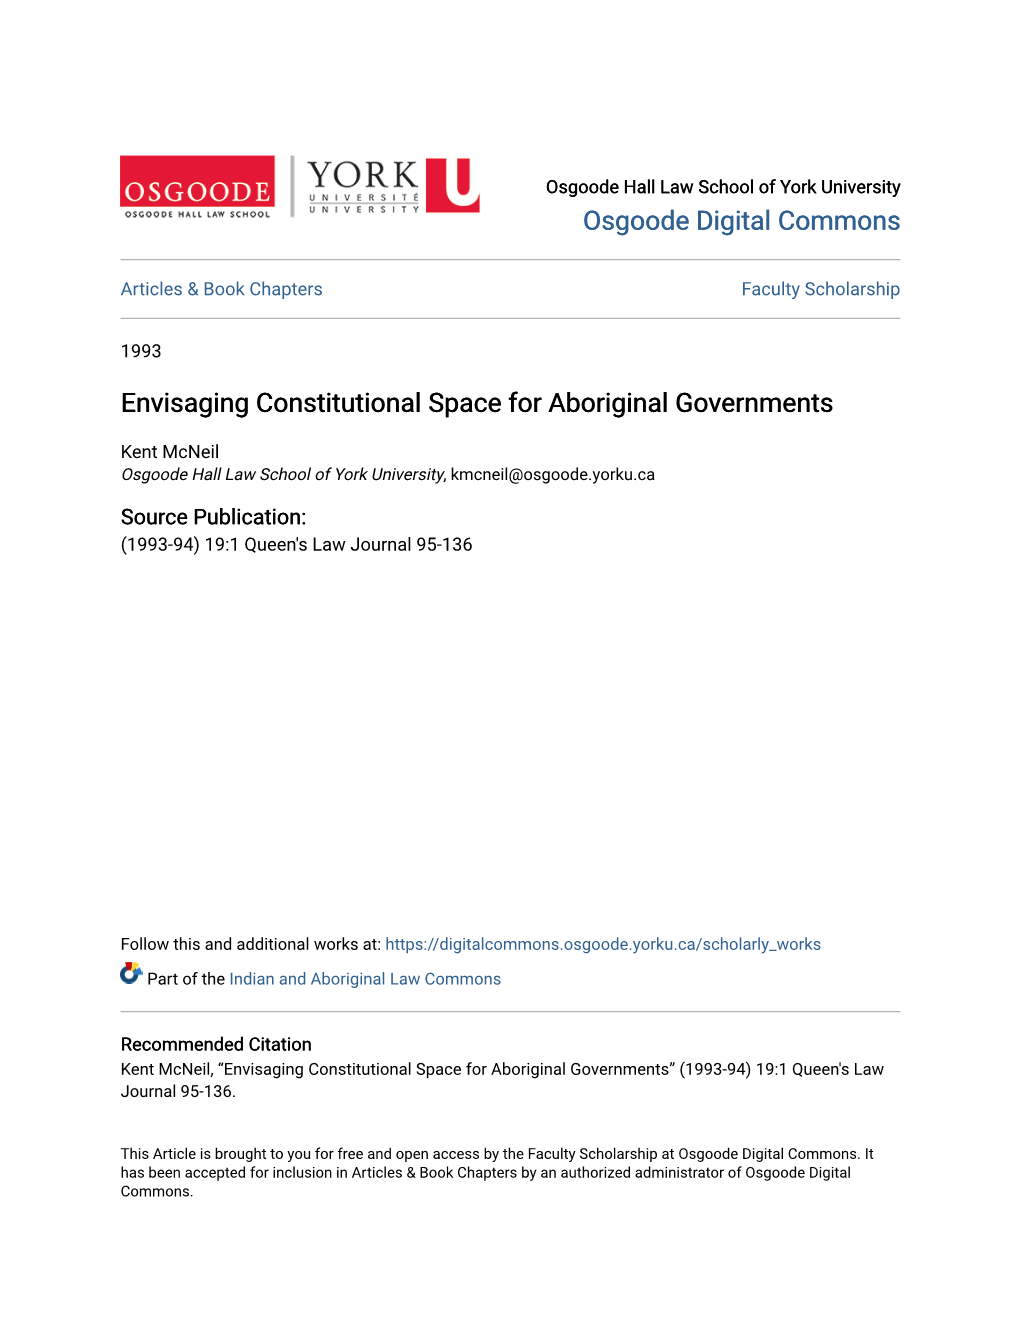 Envisaging Constitutional Space for Aboriginal Governments